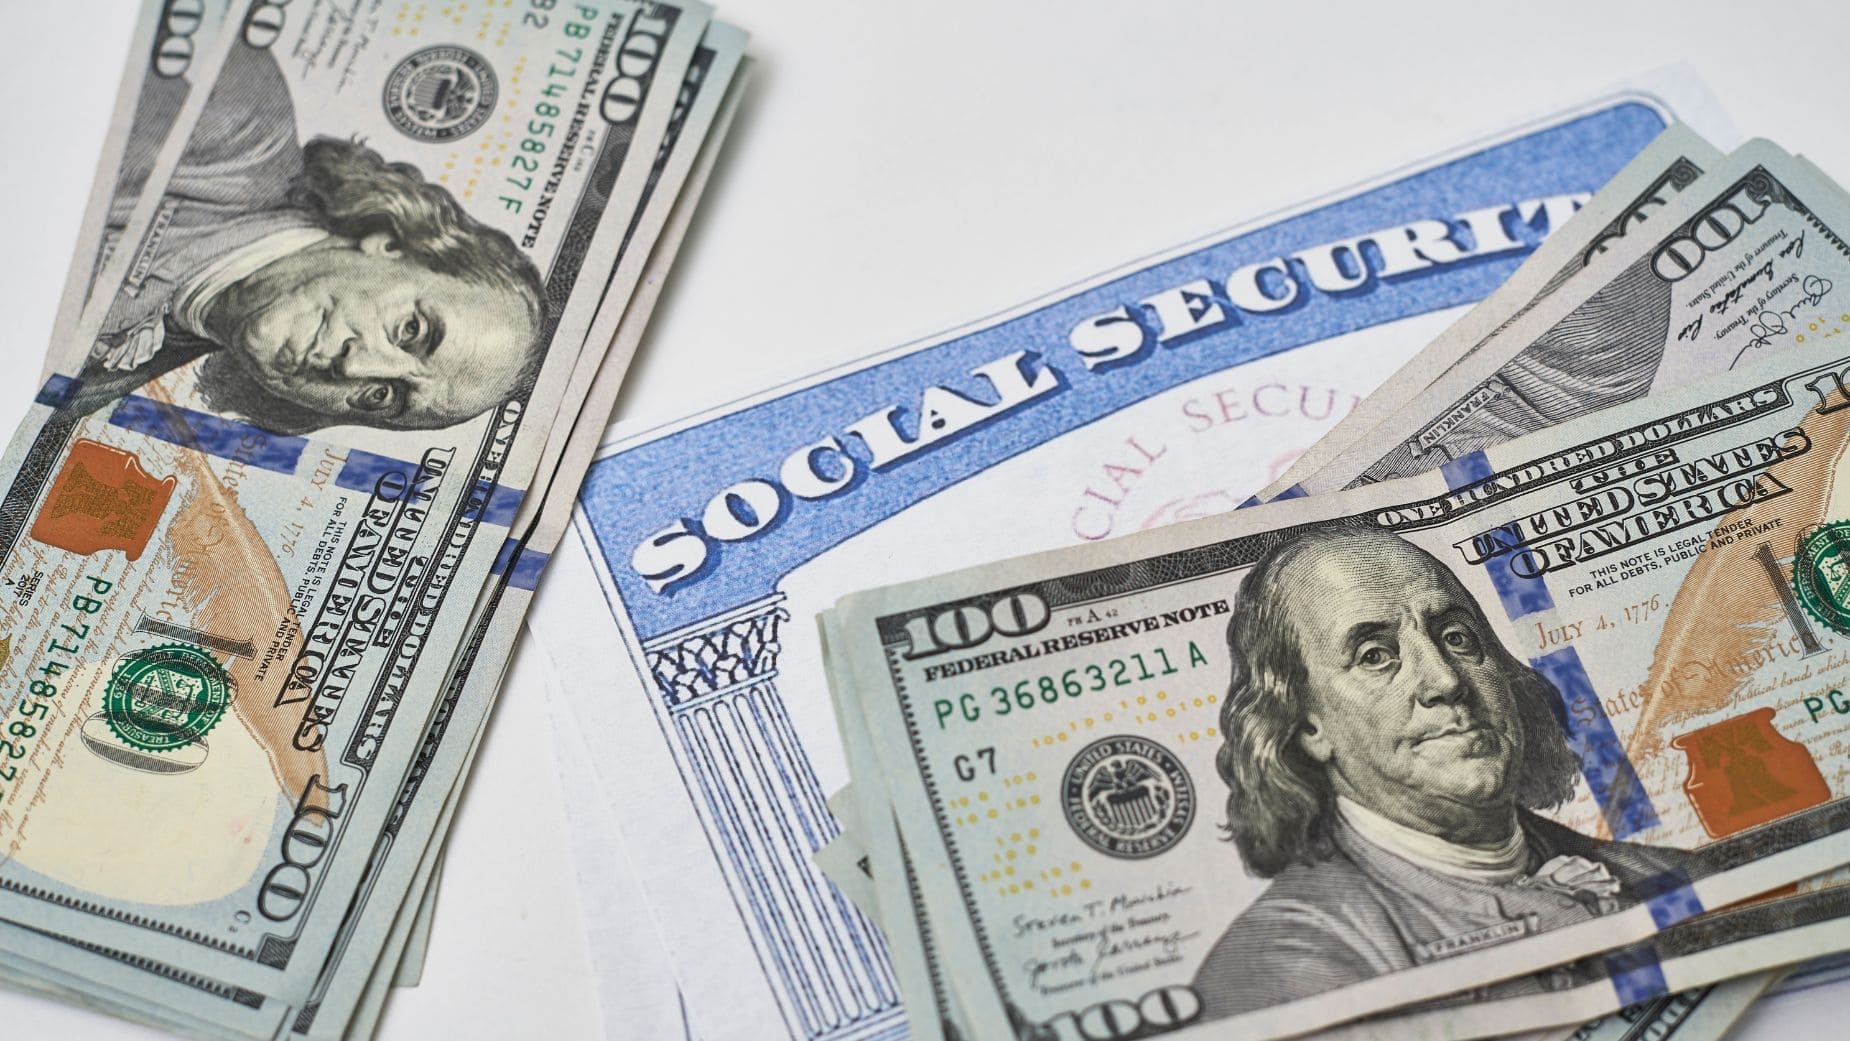 Social Security will not arrive in you do one of these things